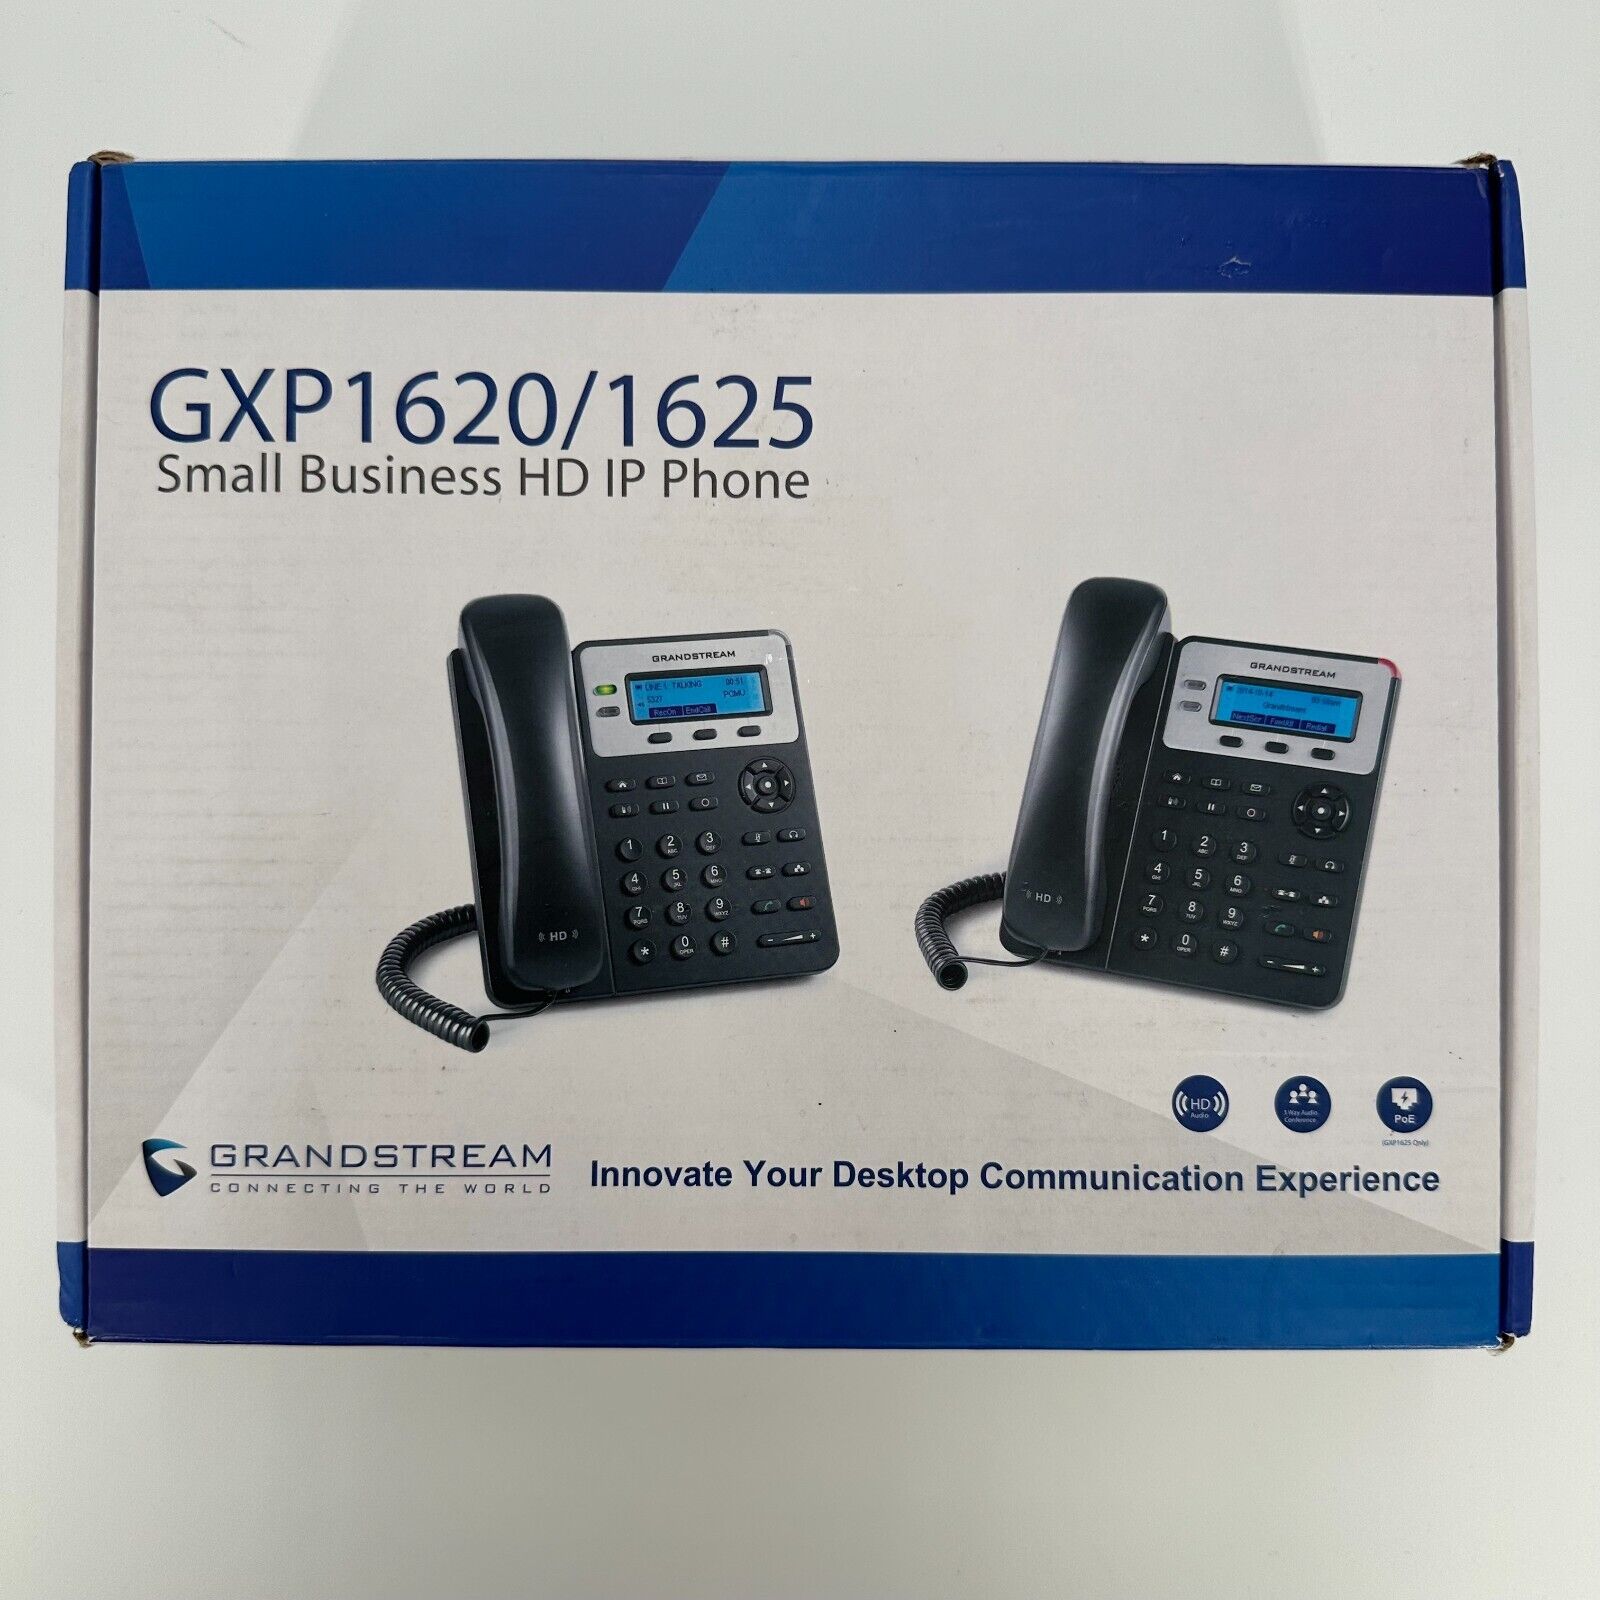 Grandstream GXP1620/1625 Small Business HD IP Phone 3-Way Conferencing Black